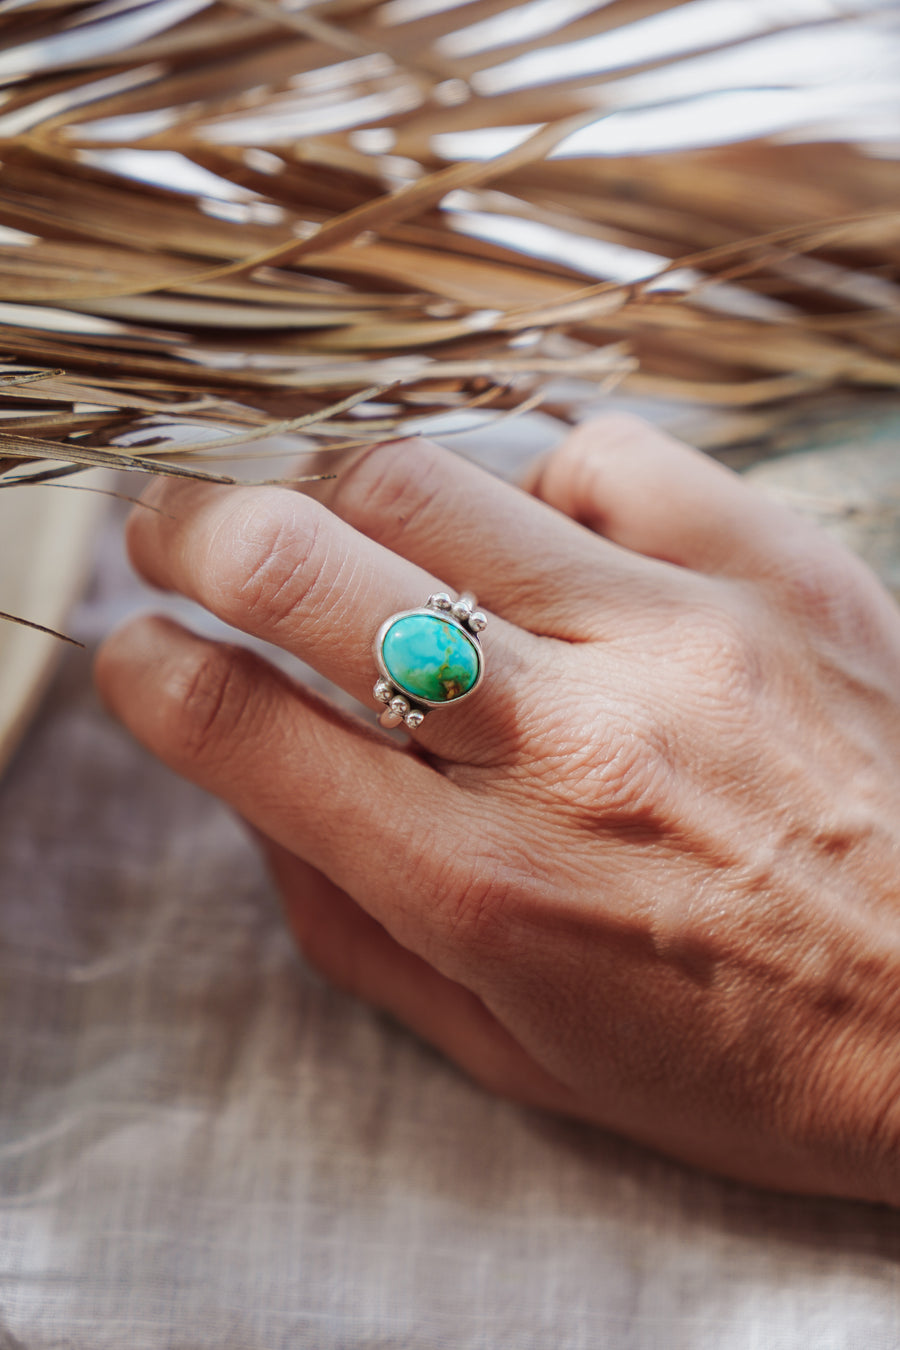 Ellipsis Ring in Sonoran Mountain Turquoise Size 8